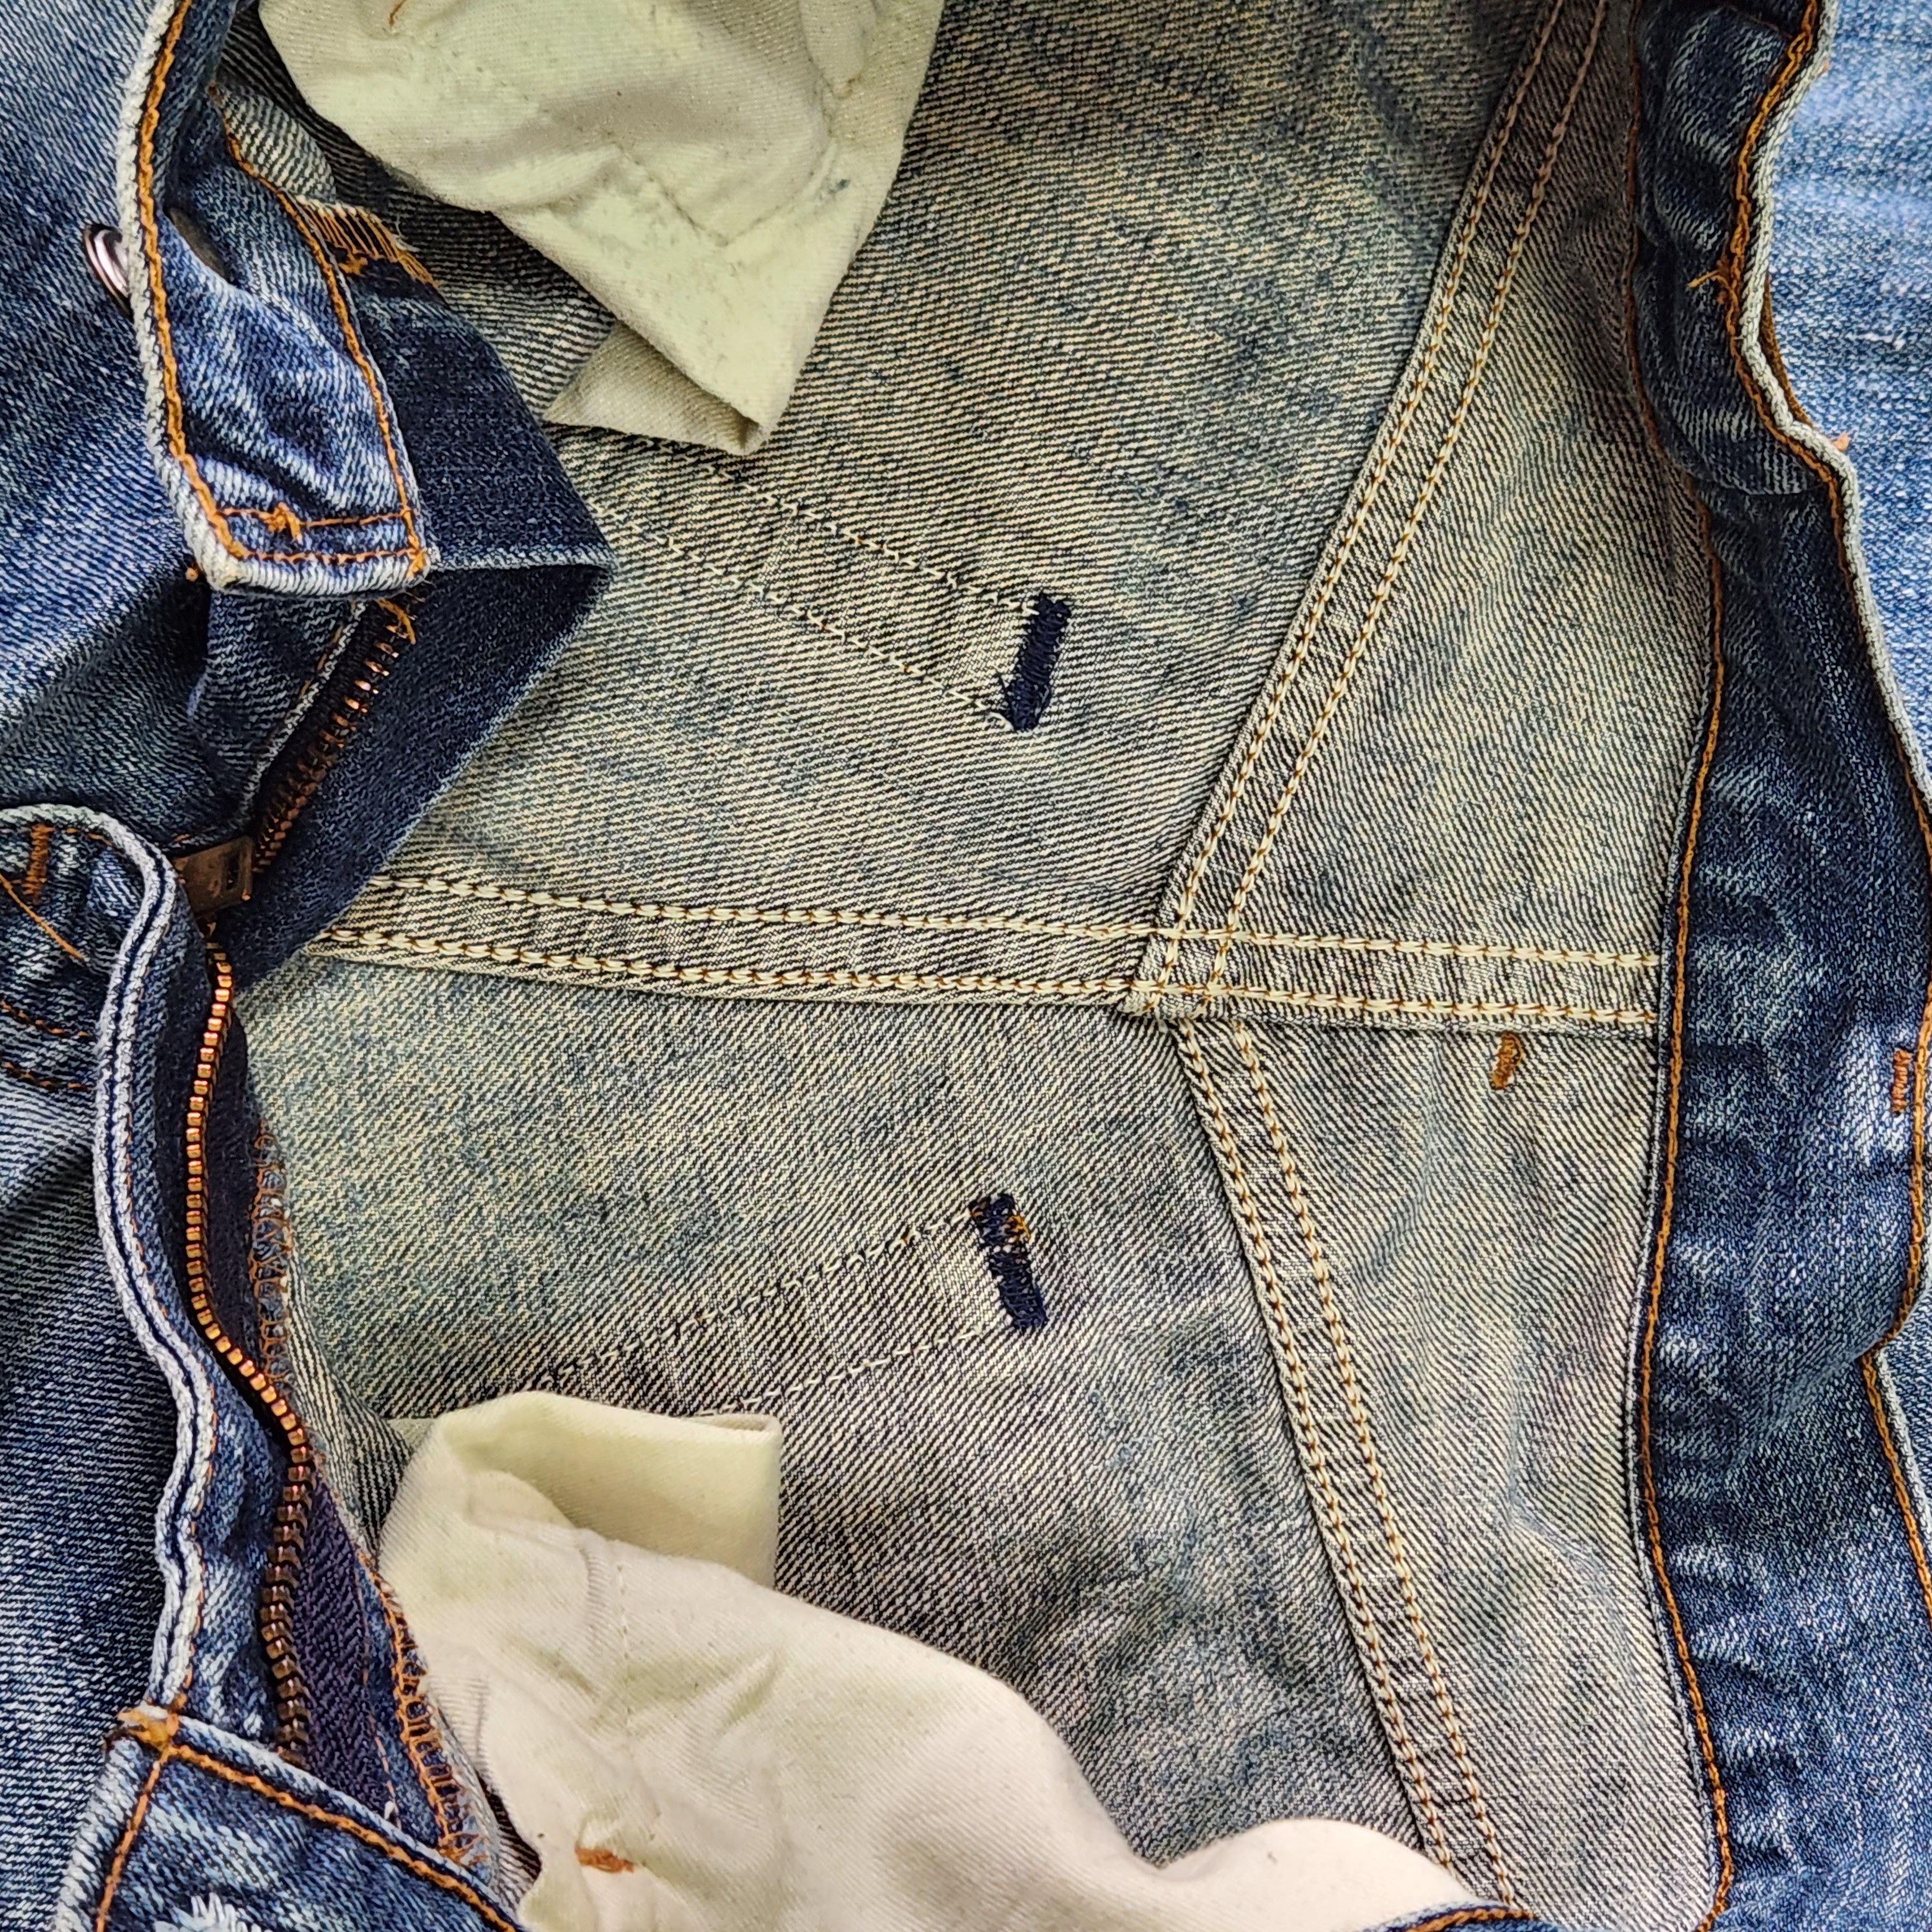 Levis 502 Vintage Distressed Ripped Denim Jeans Year 2002 - 9